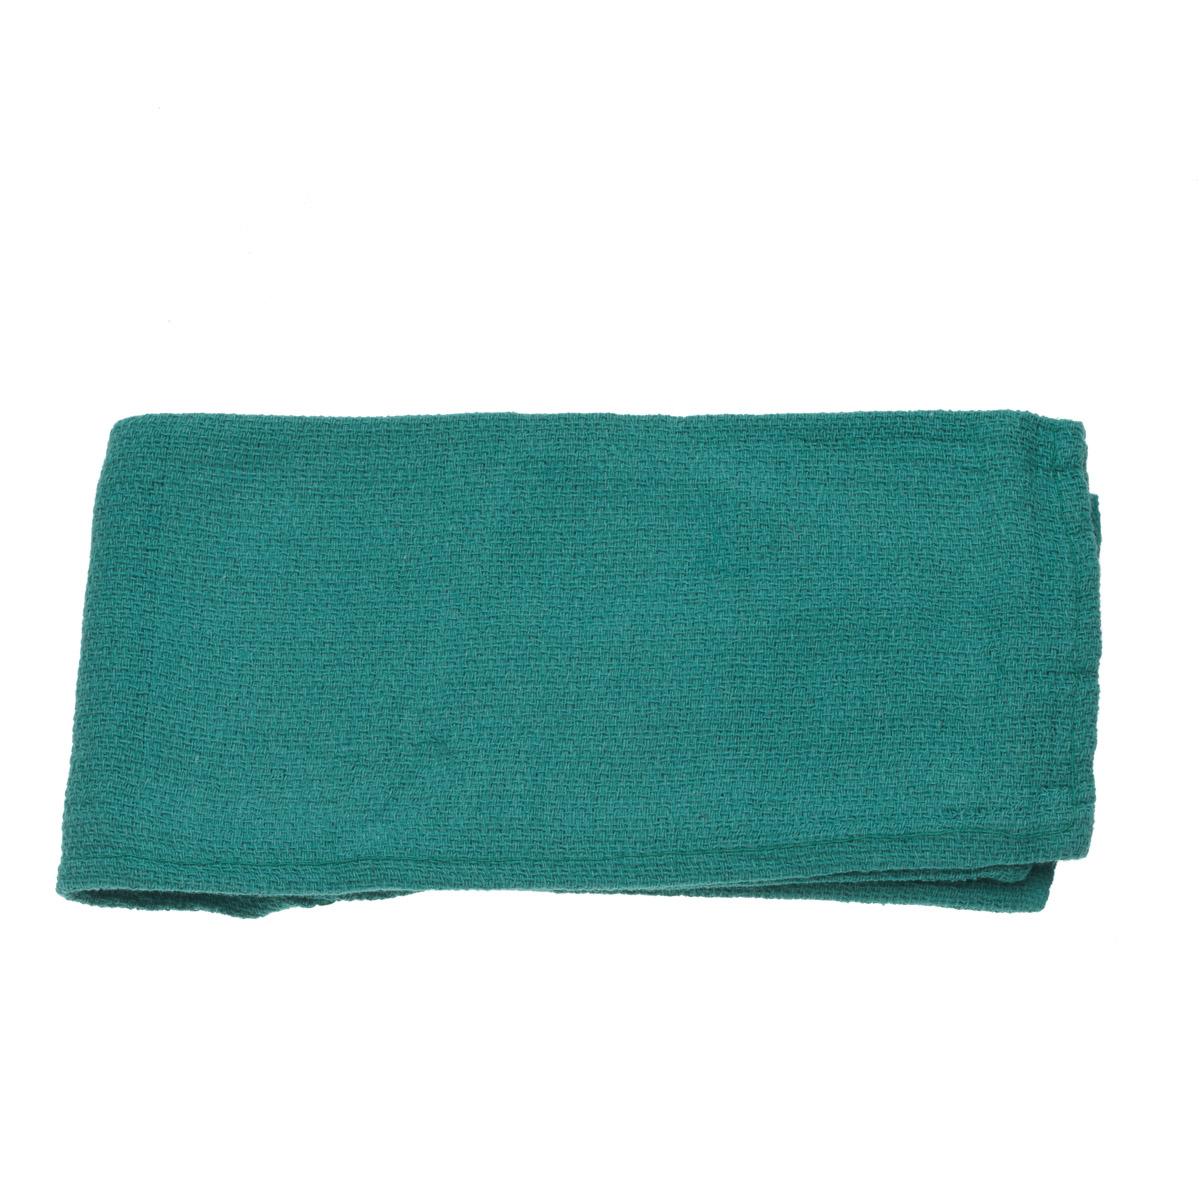 Non Sterile Surgery Towel Green 17x27" Prewashed Delinted 100% Cotton Absorbant 